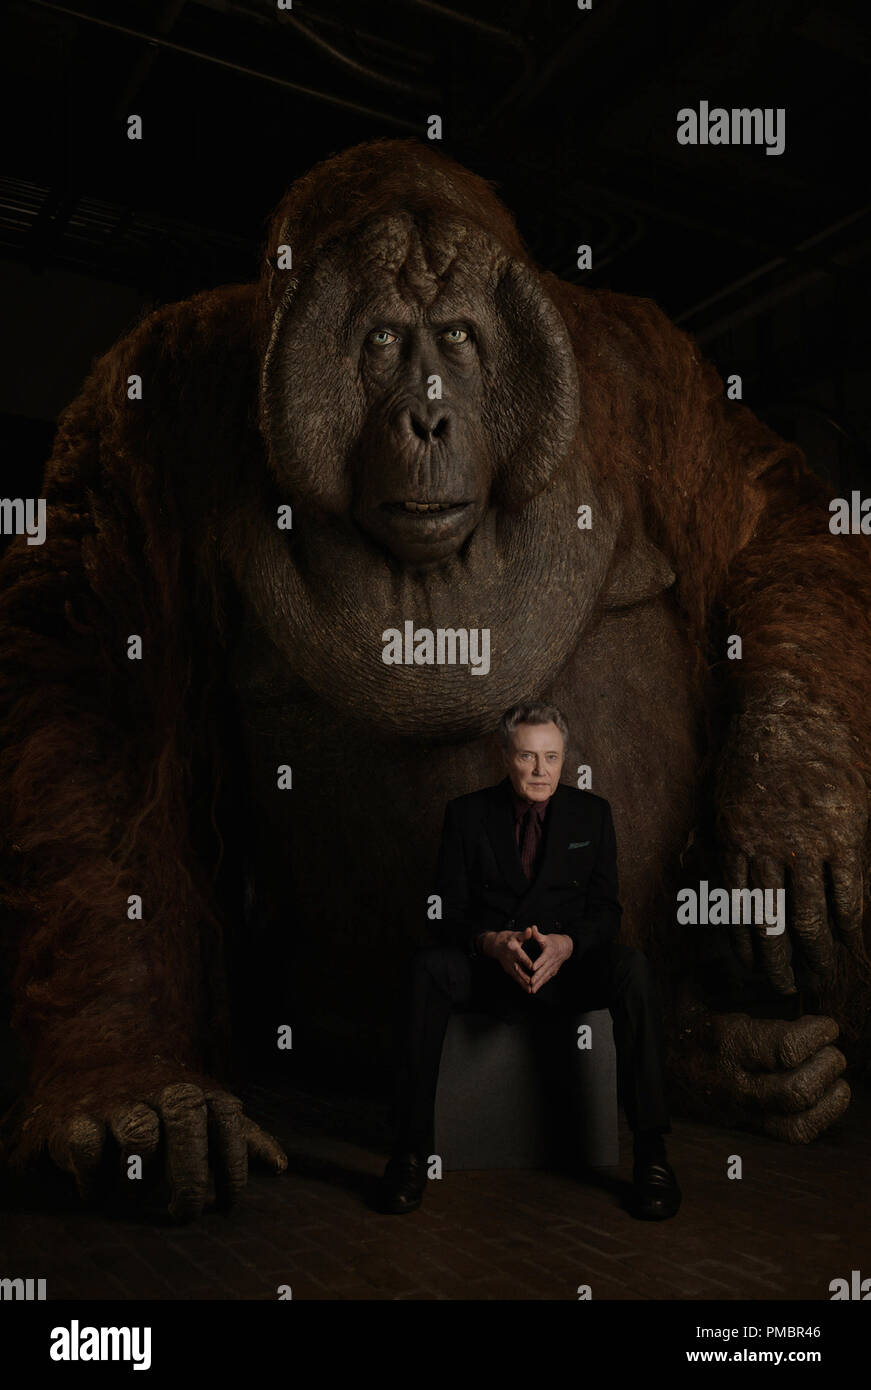 THE JUNGLE BOOK - King Louie is a formidable ape who desperately wants the secret of Man's deadly 'red flower'--fire. He's convinced Mowgli has the information he seeks. 'King Louie is huge--12 feet tall,' says Christopher Walken, who voices the character. 'But he's as charming as he is intimidating when he wants to be.'  Photo by: Sarah Dunn. ©2016 Disney Enterprises, Inc. All Rights Reserved. Stock Photo